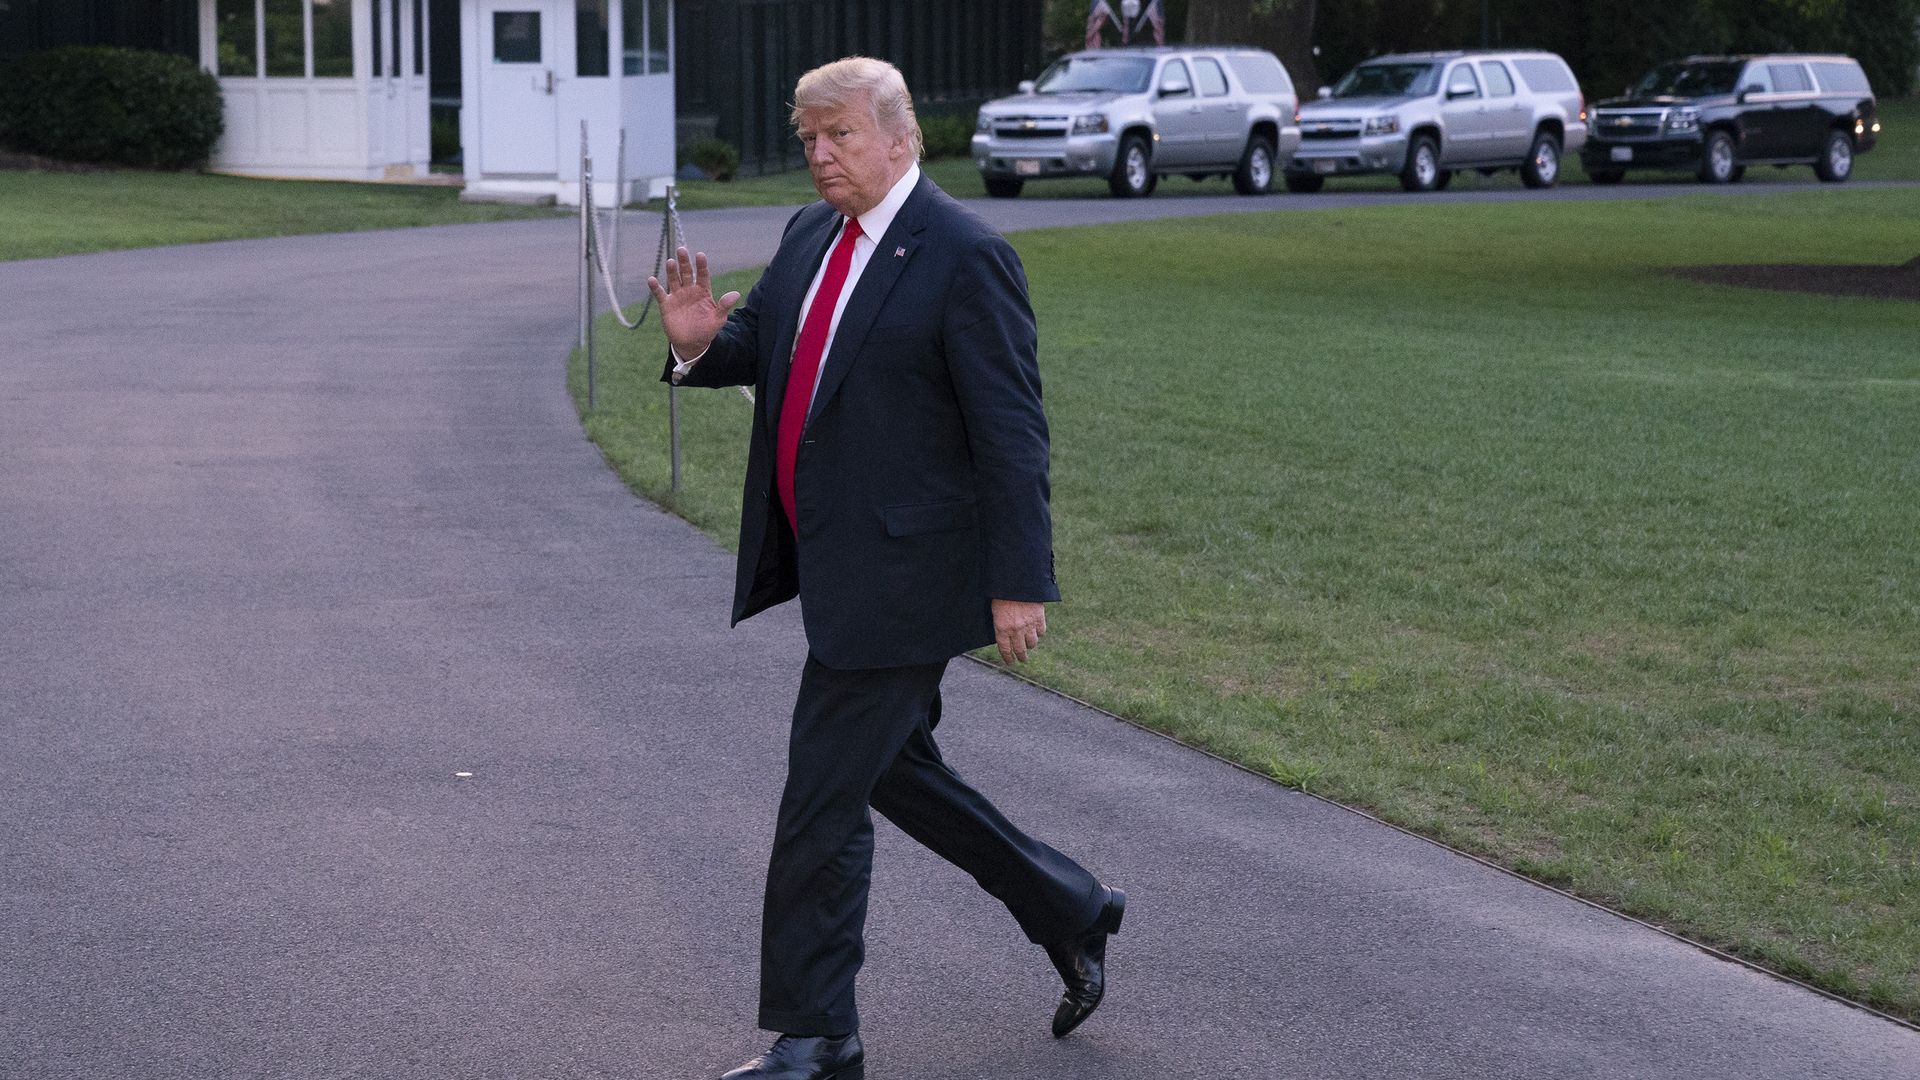 Trump walking across a road on the White House lawn waving to reporters